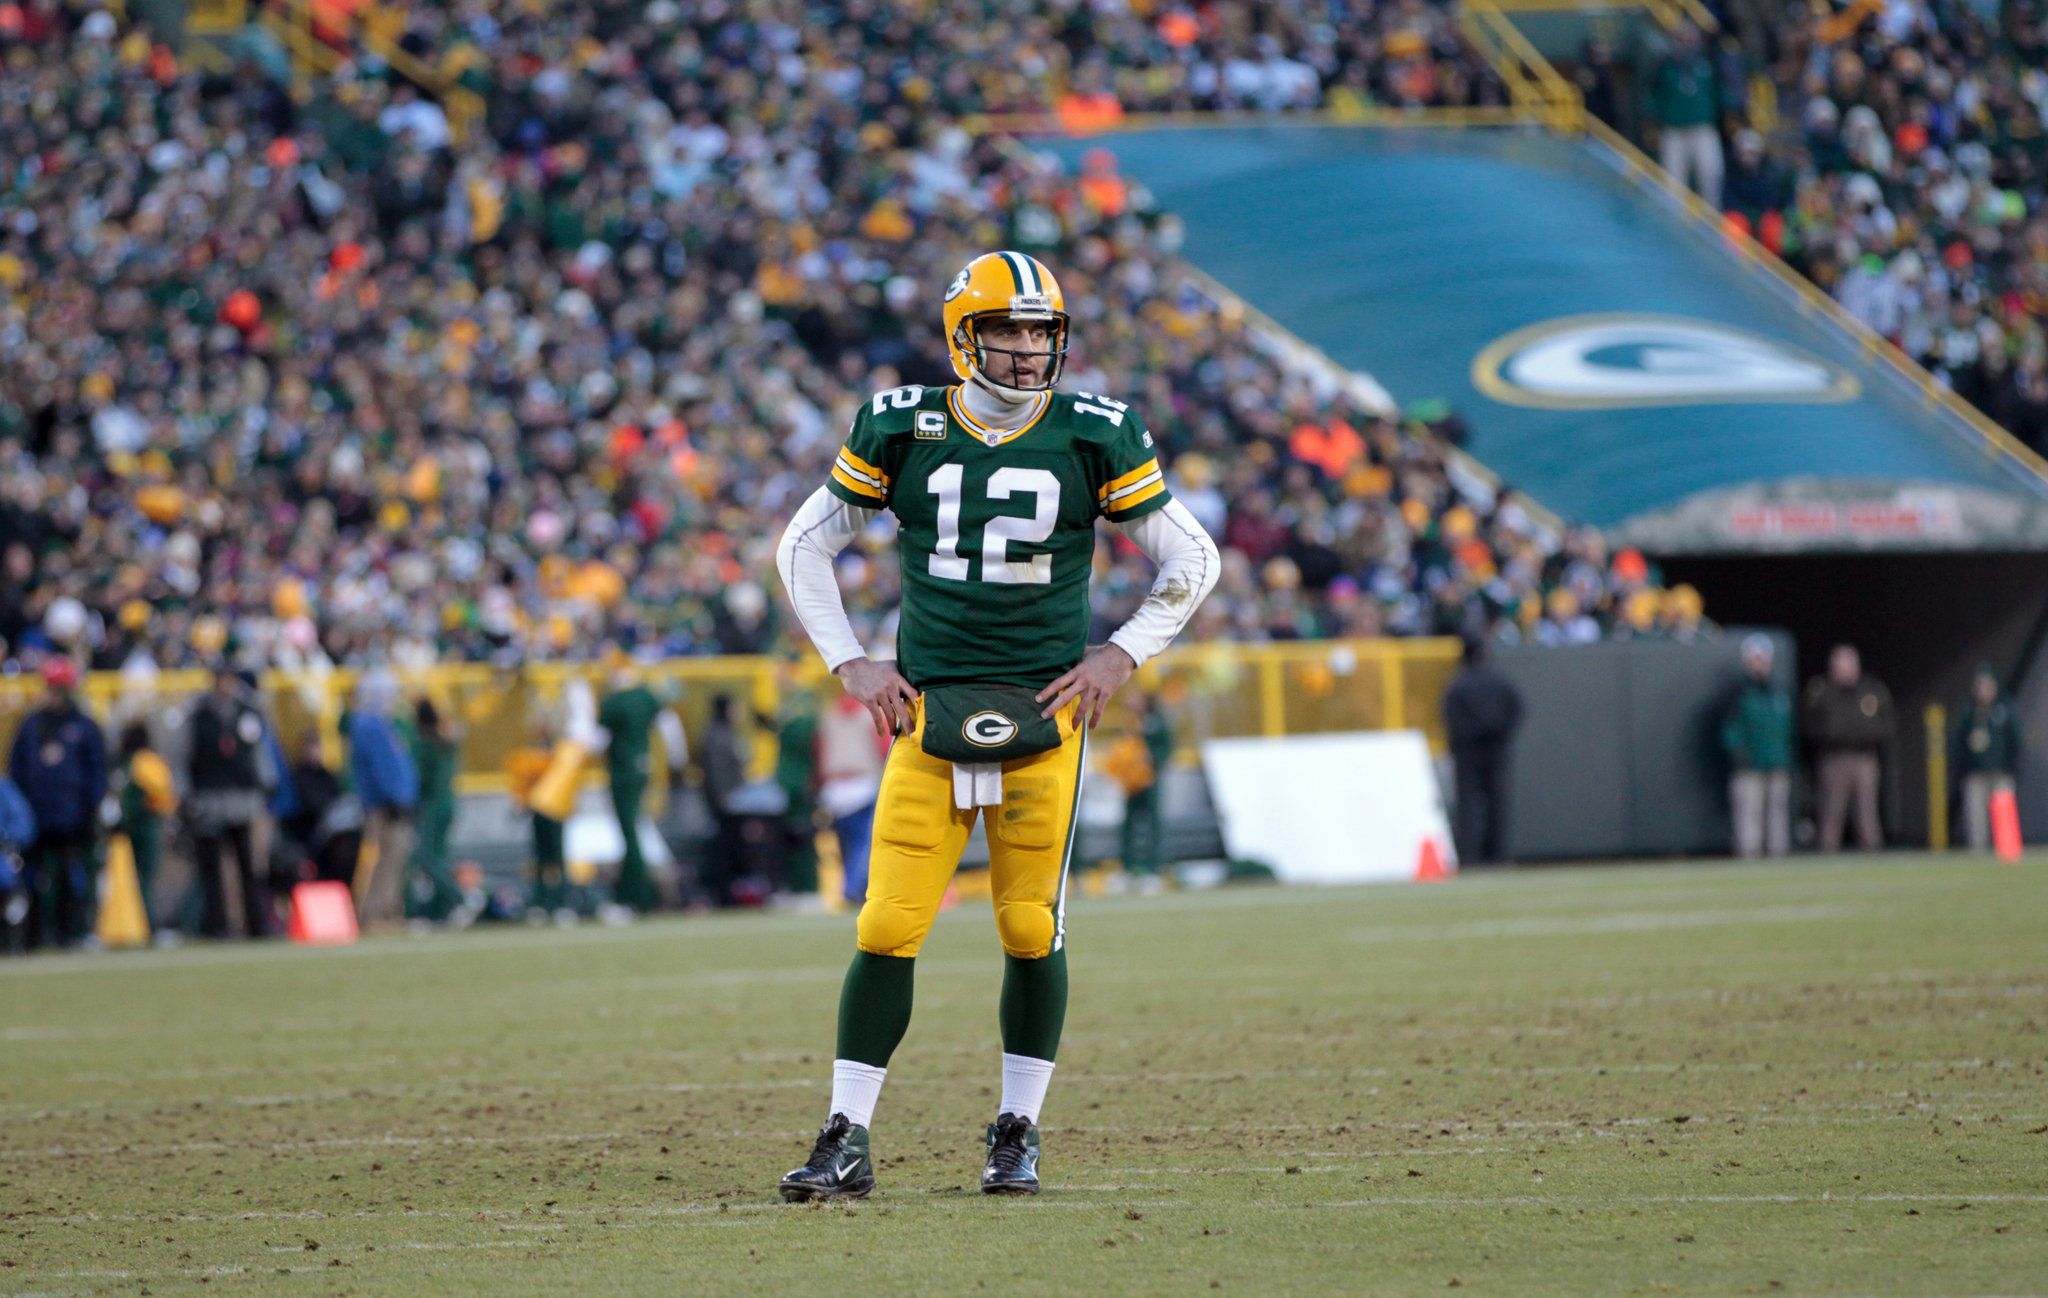 Cool Aaron Rodgers Background Wallpaper 6218 2048x1298 px